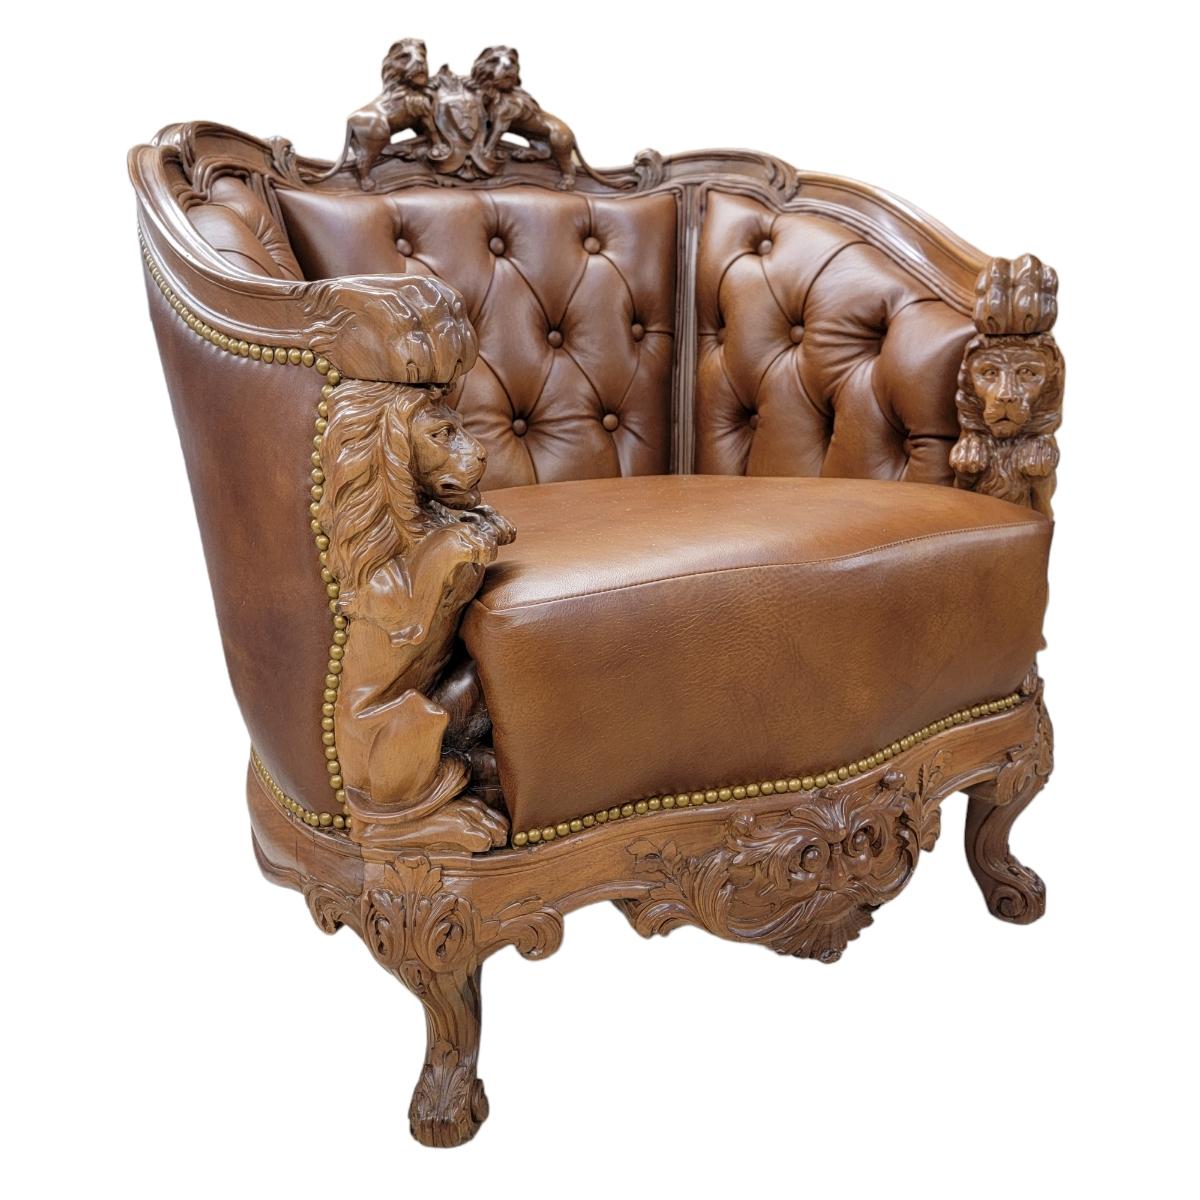 Antique Italian Rococo Style Figural Lion Tufted Italian Leather Parlor Set For Sale 11